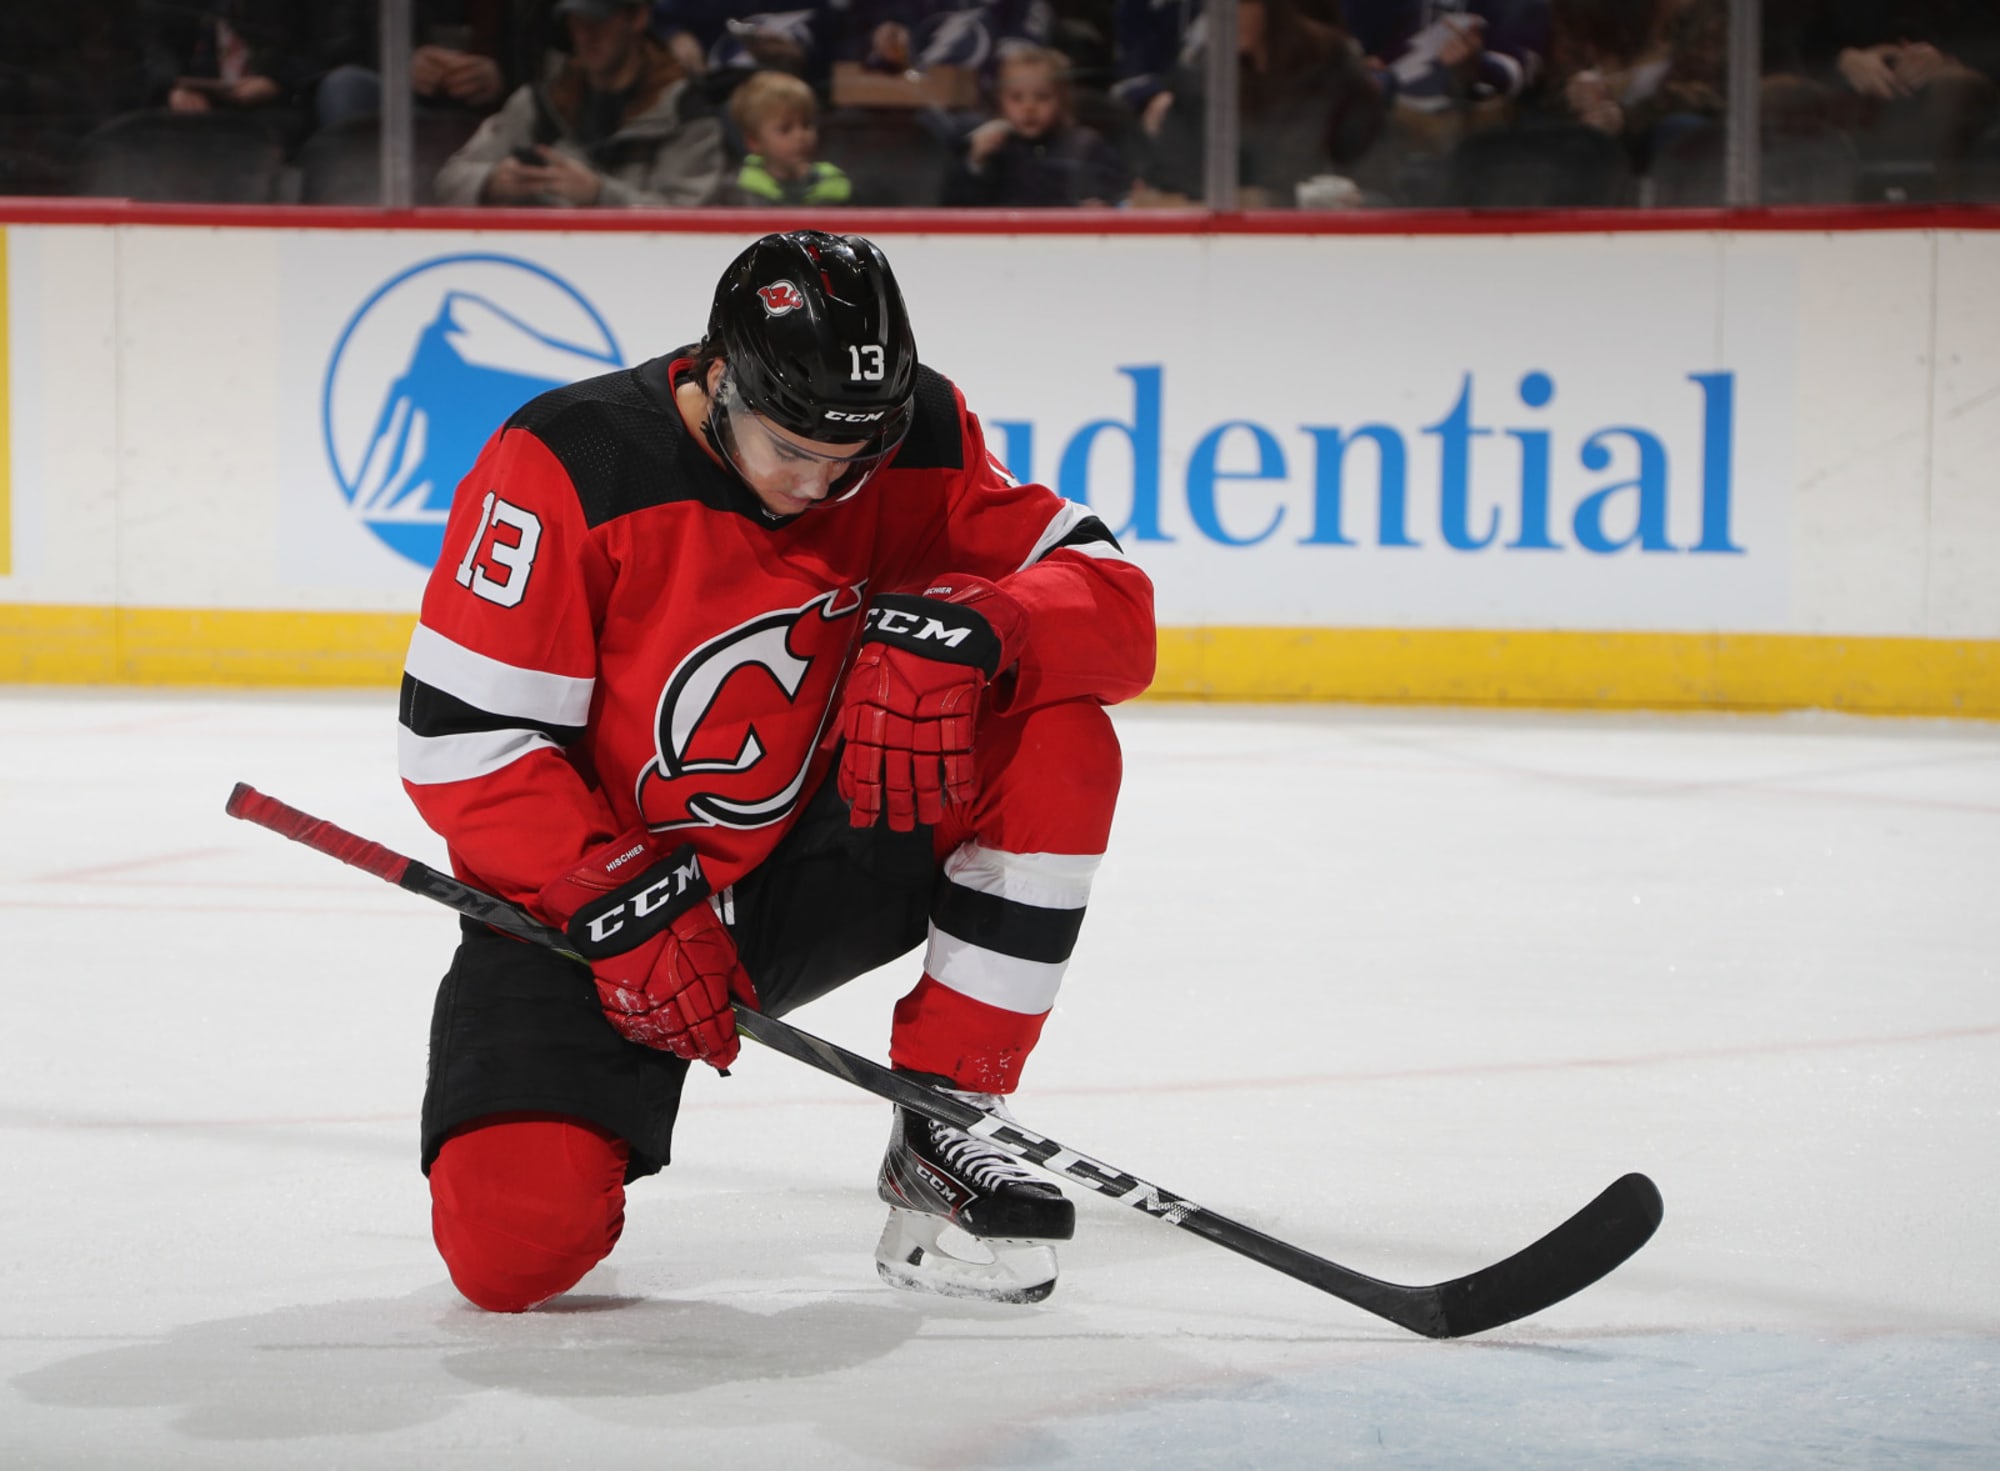 New Jersey Devils Shouldn't Separate Taylor Hall and Nico Hischier